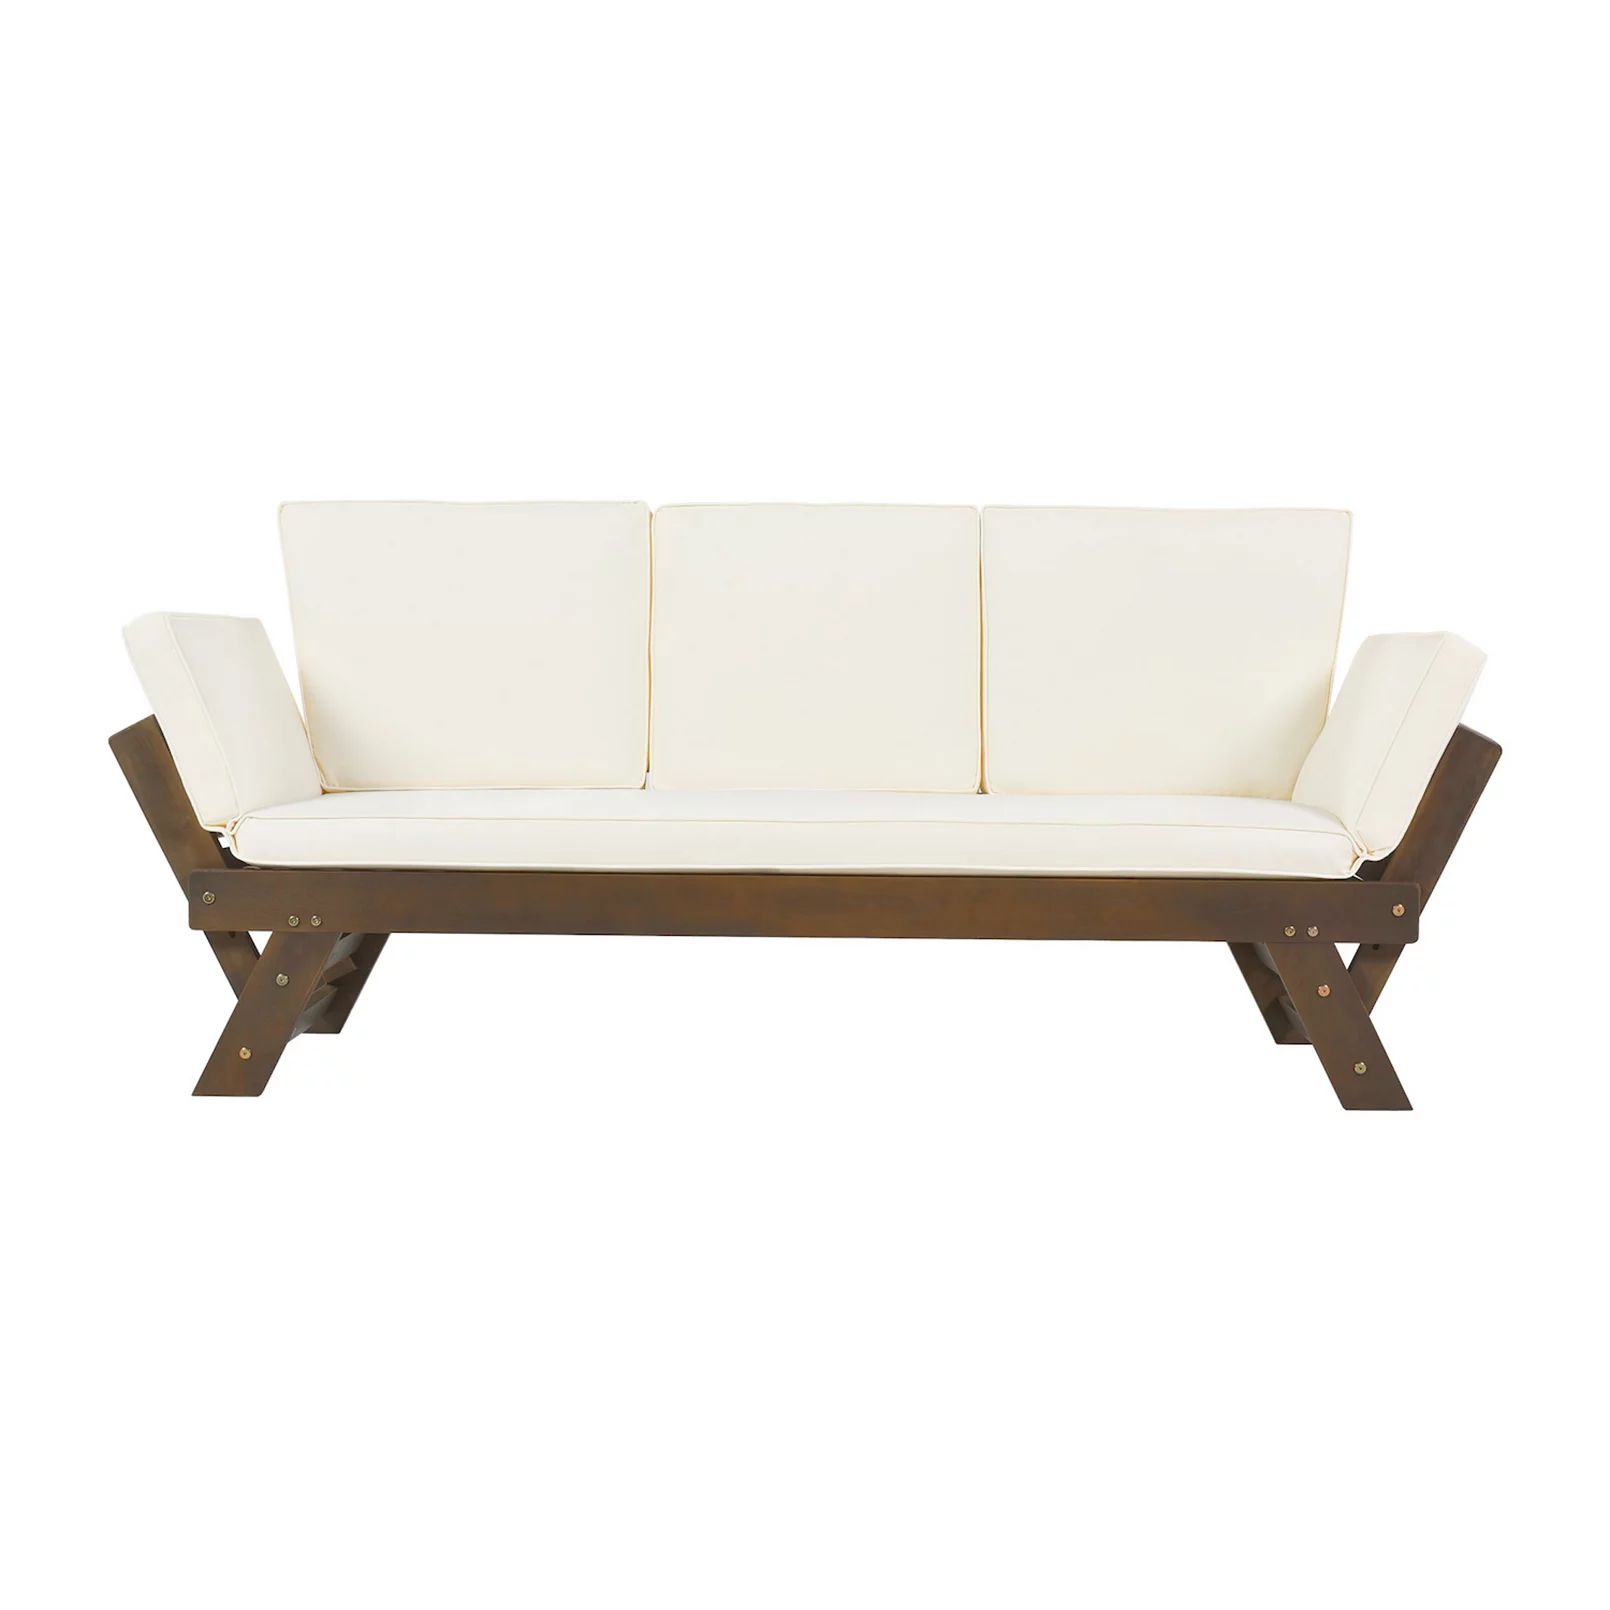 Outdoor Adjustable Patio Wooden Daybed Sofa Chaise Lounge With Cushions | Kohl's